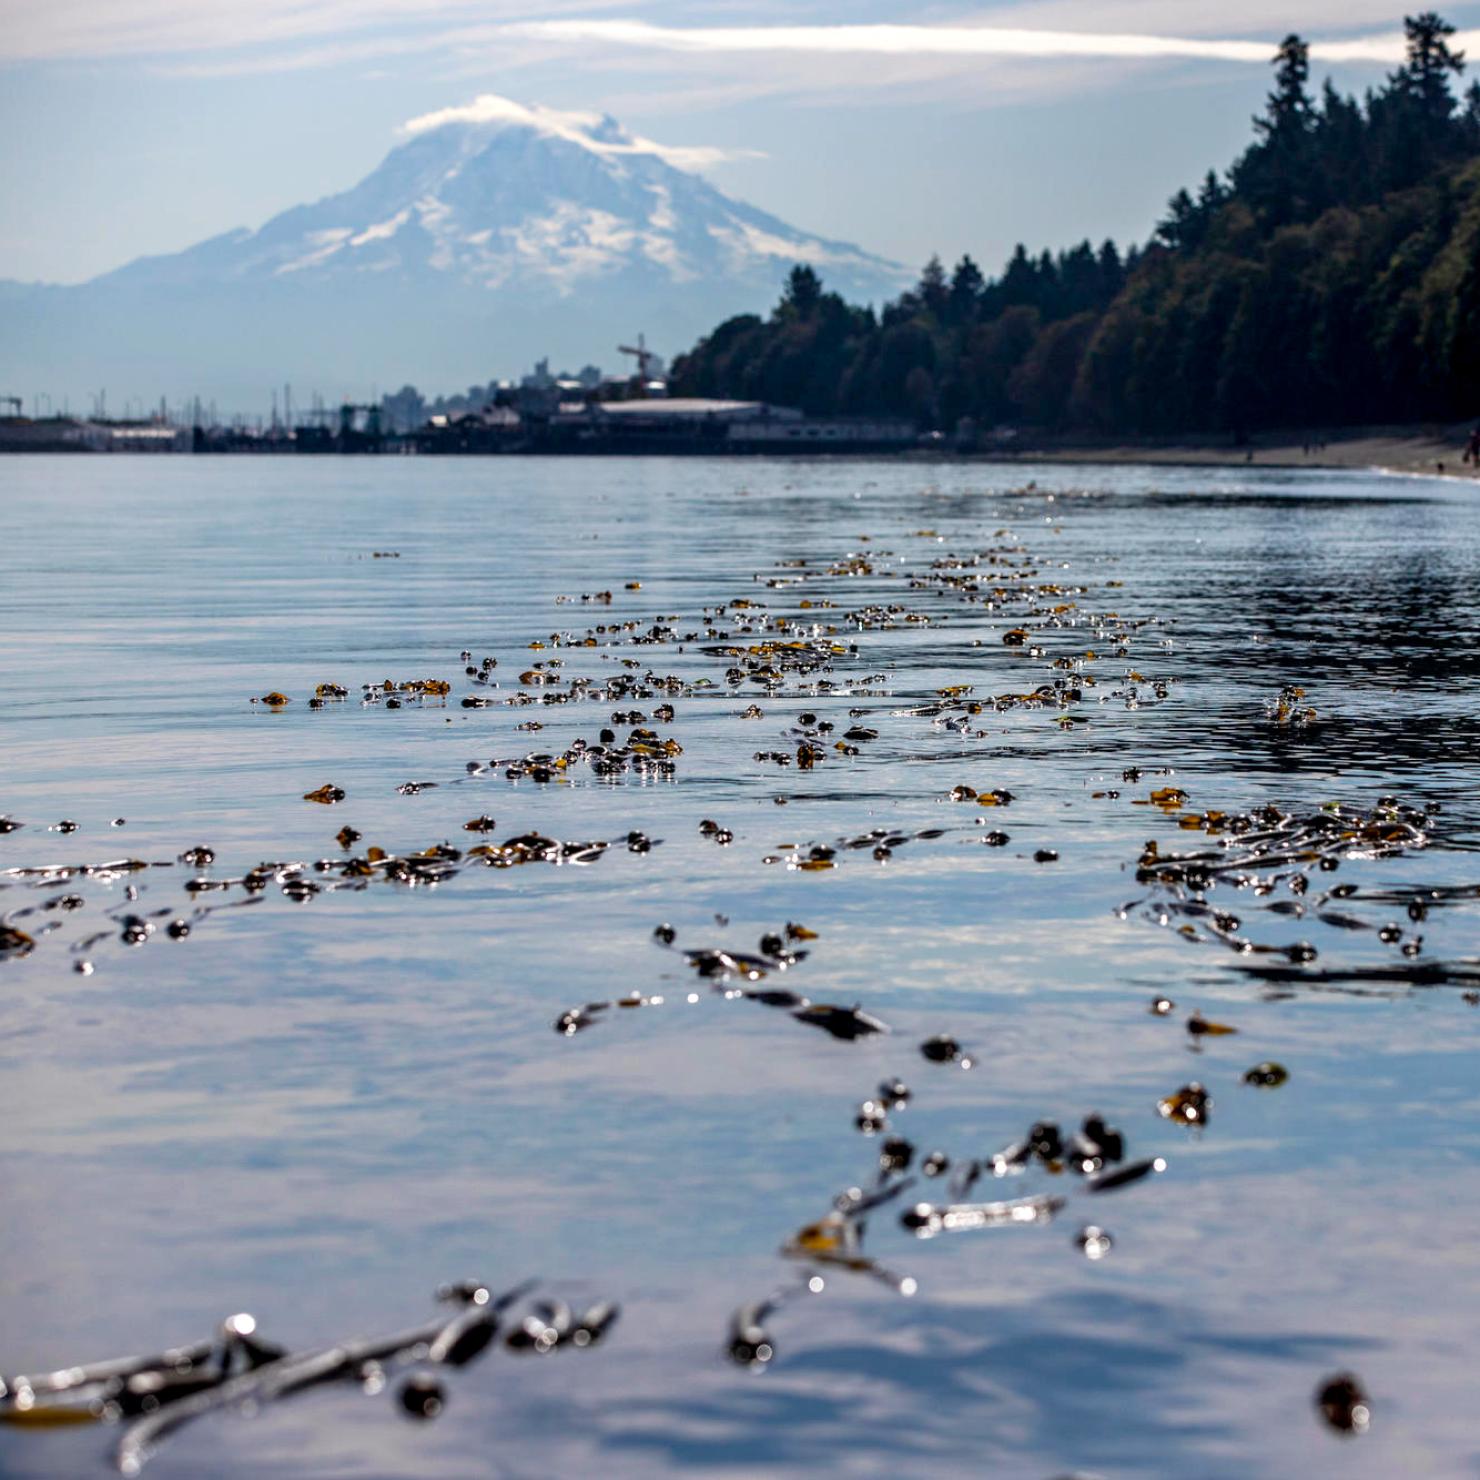 Kelp on surface of water in Puget Sound with Mt. Rainier in the distance.